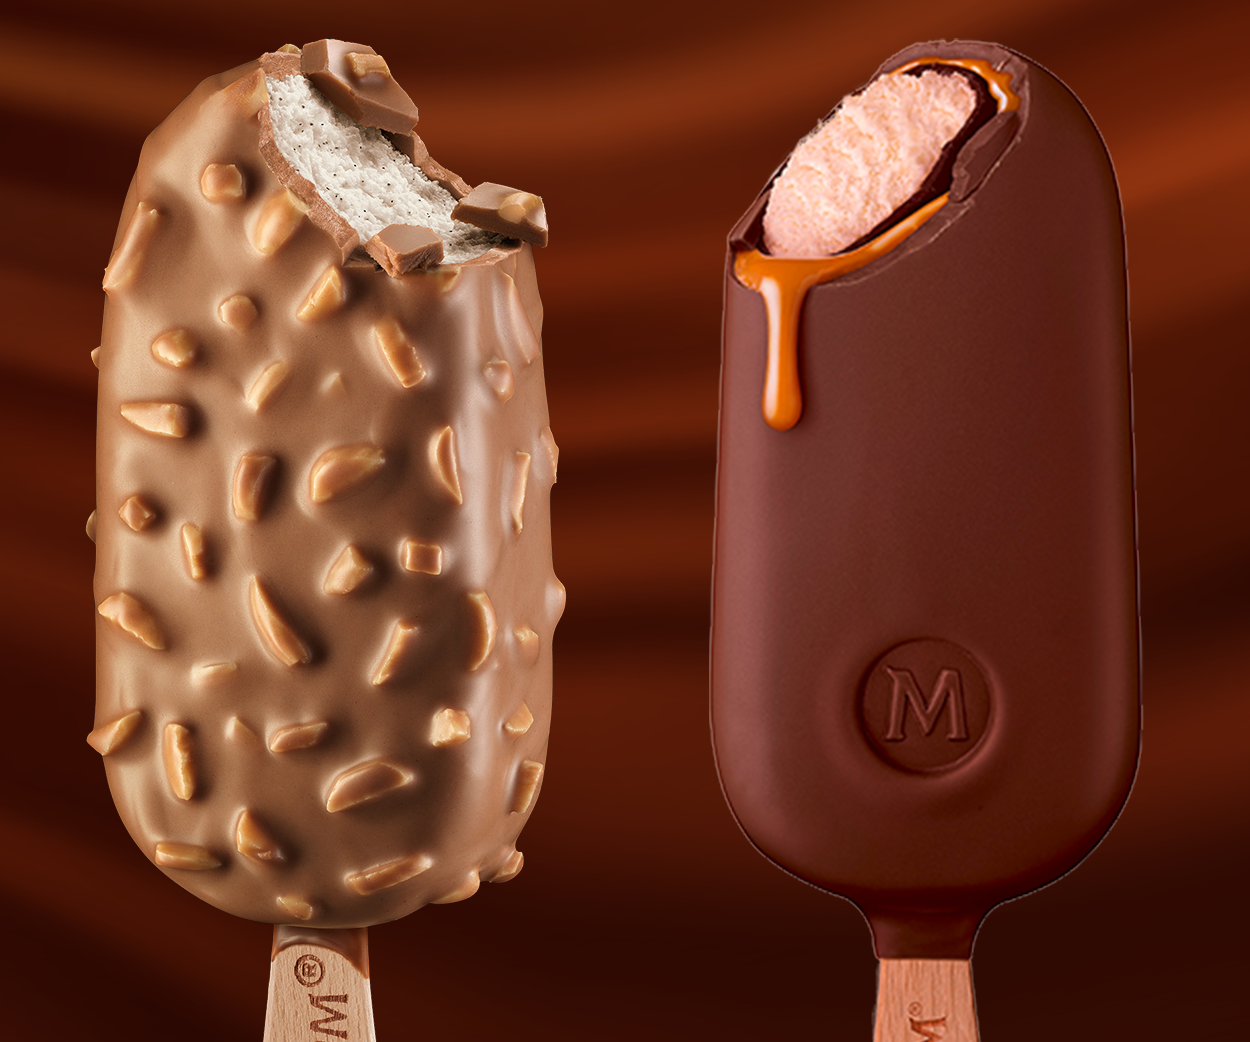 magnum almond and double caramel bars from wholesale distributor transcold distribution